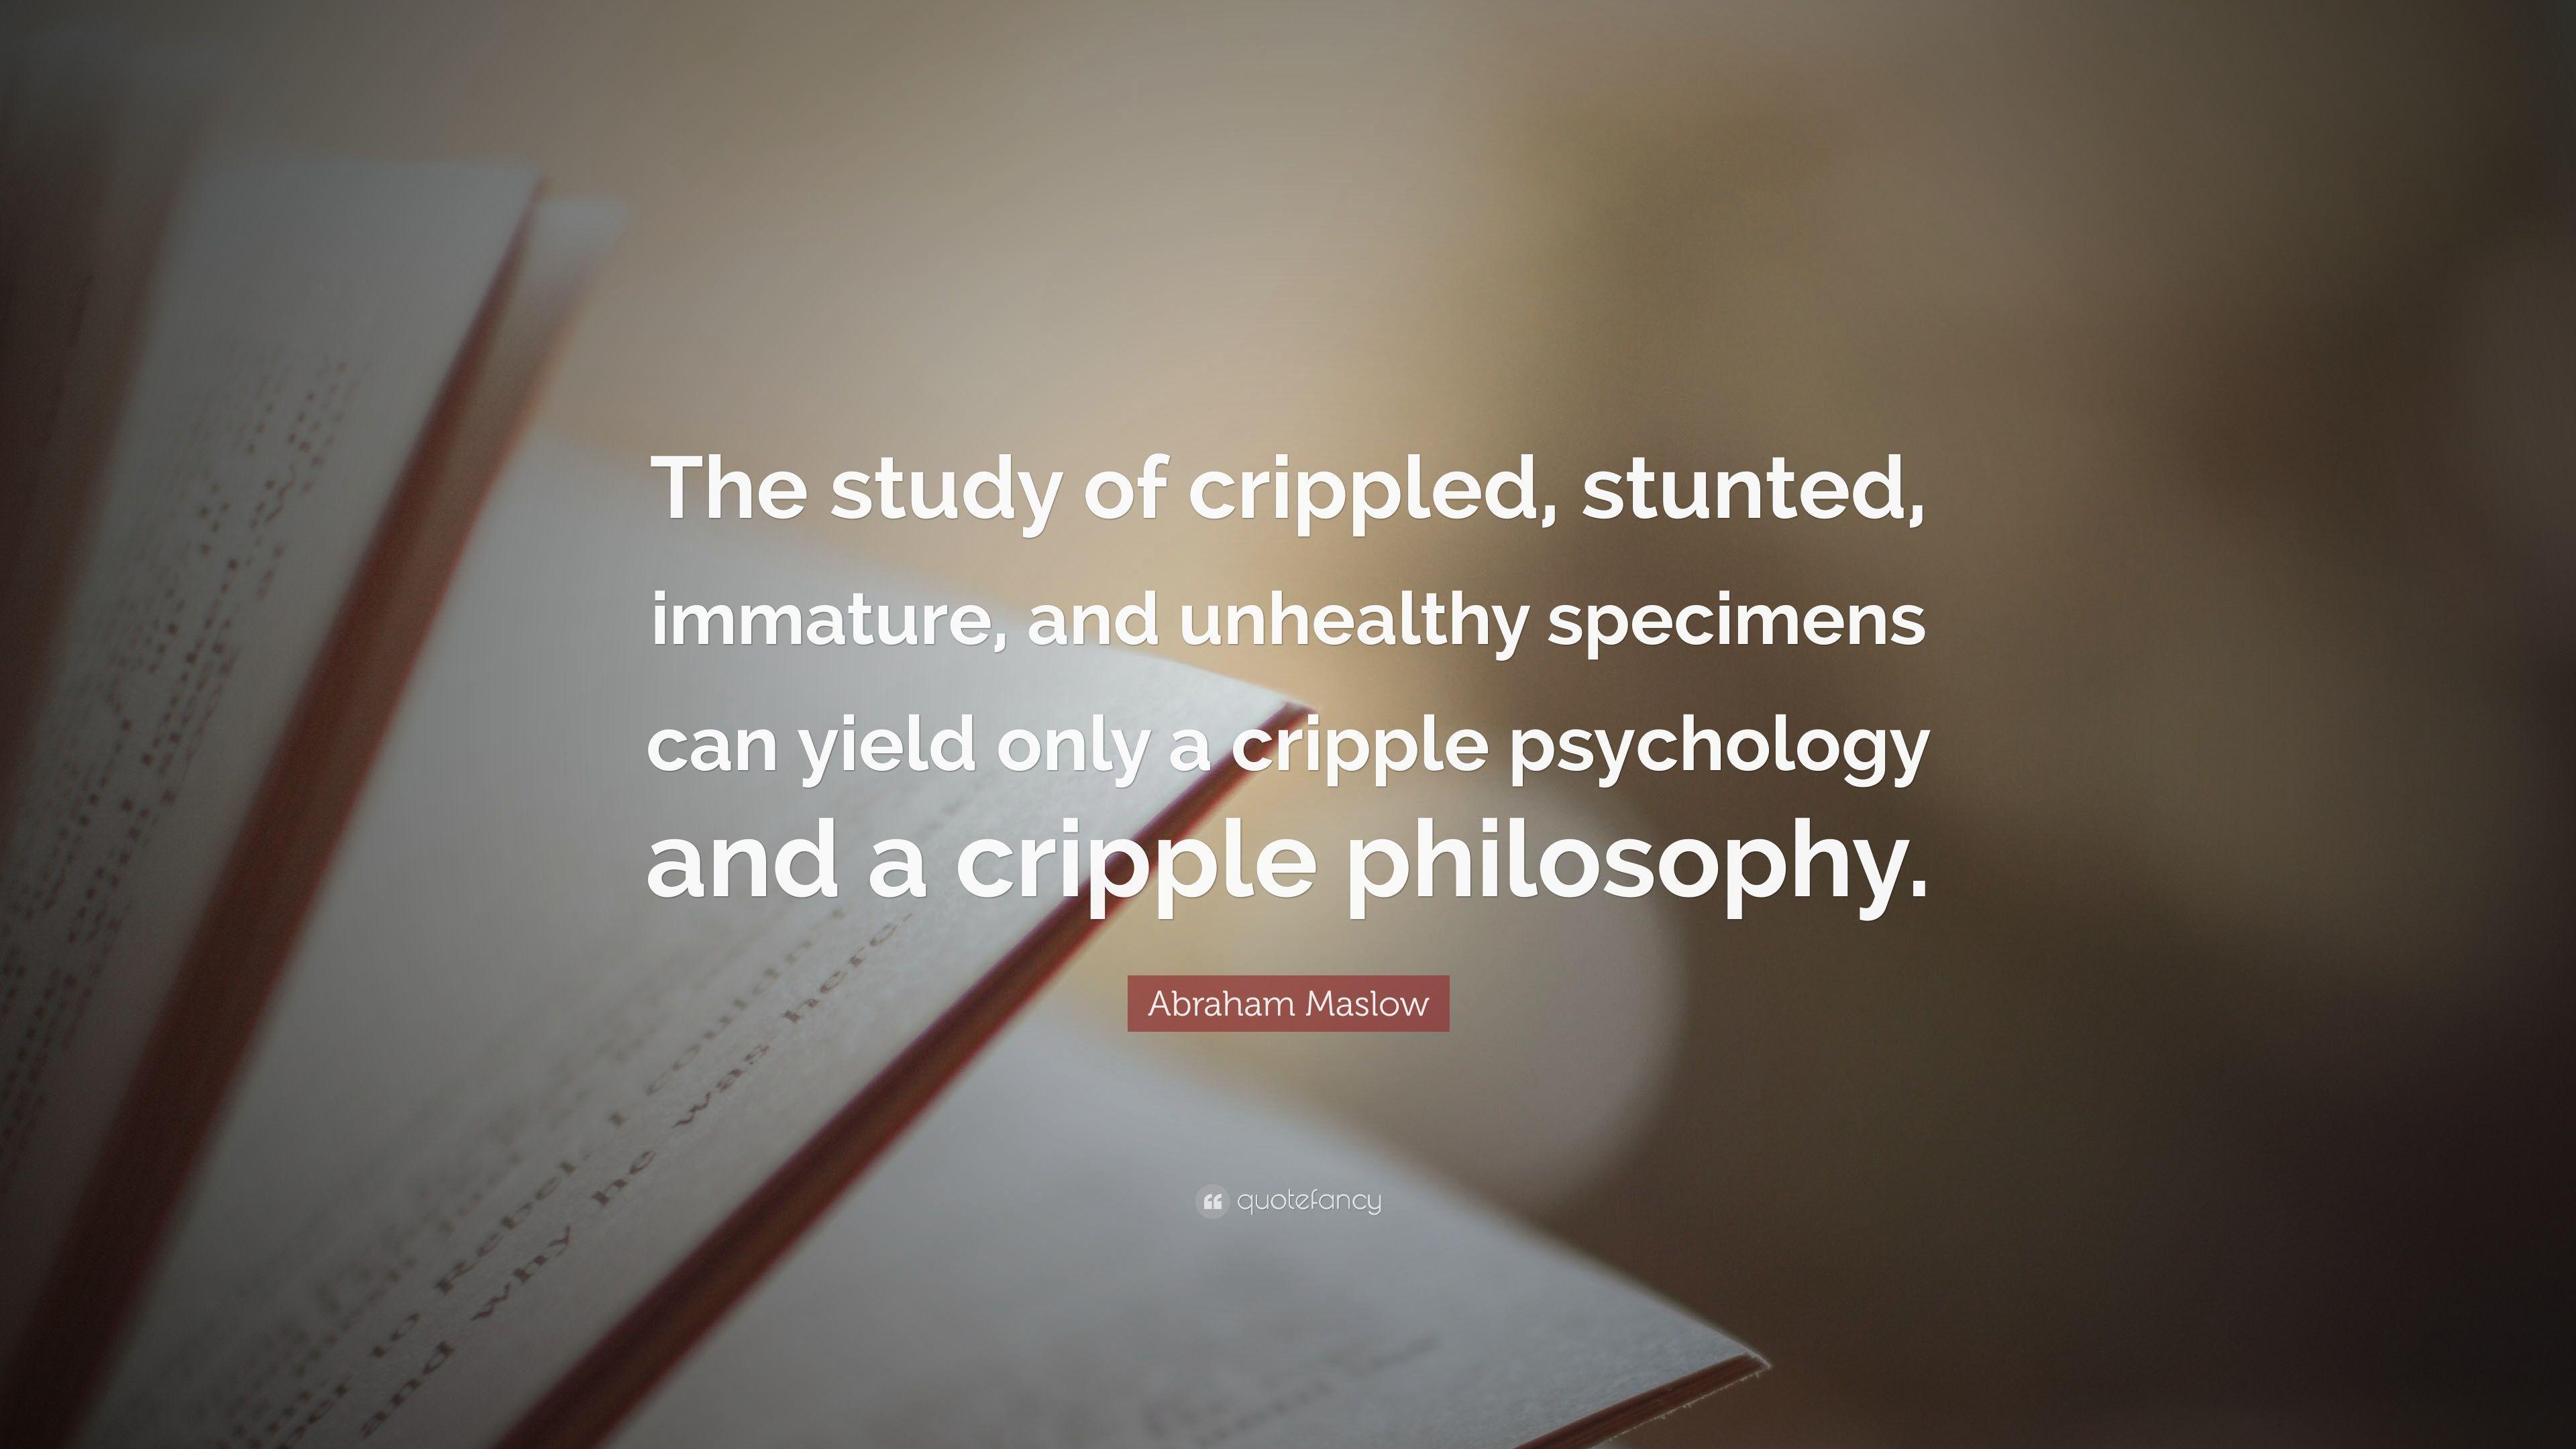 Abraham Maslow Quote: “The study of crippled, stunted, immature